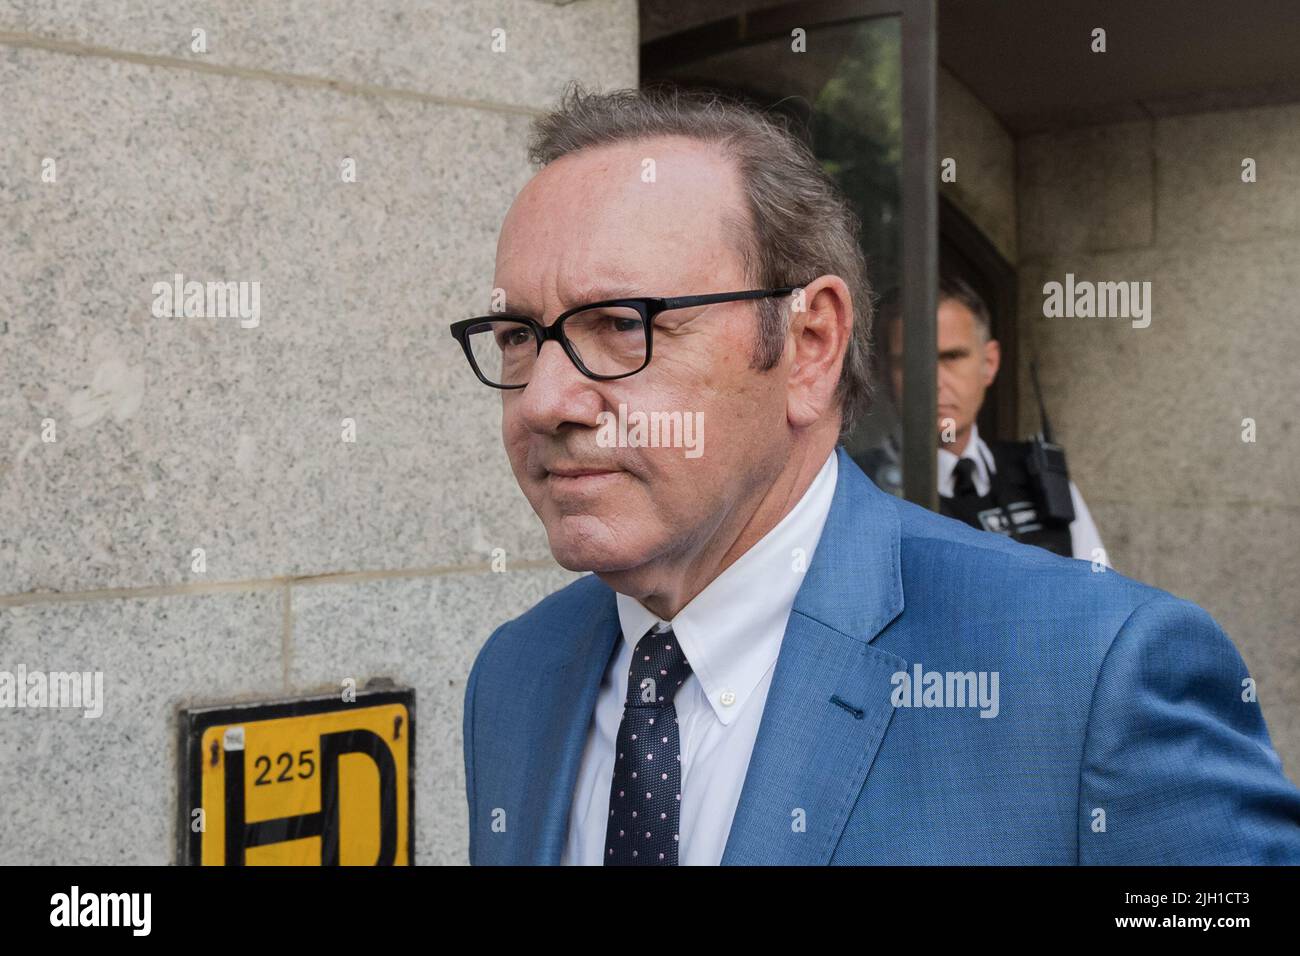 London, UK. 14th July, 2022. US actor Kevin Spacey leaves the Old Bailey following the plea and trial preparation hearing over four charges of sexual offences against three men. The Oscar-winning actor pleaded not guilty to the charges related to the offences which allegedly took place in London and Gloucestershire between 2005 and 2013 while Mr. Spacey was the artistic director at the Old Vic theatre. Credit: Wiktor Szymanowicz/Alamy Live News Stock Photo